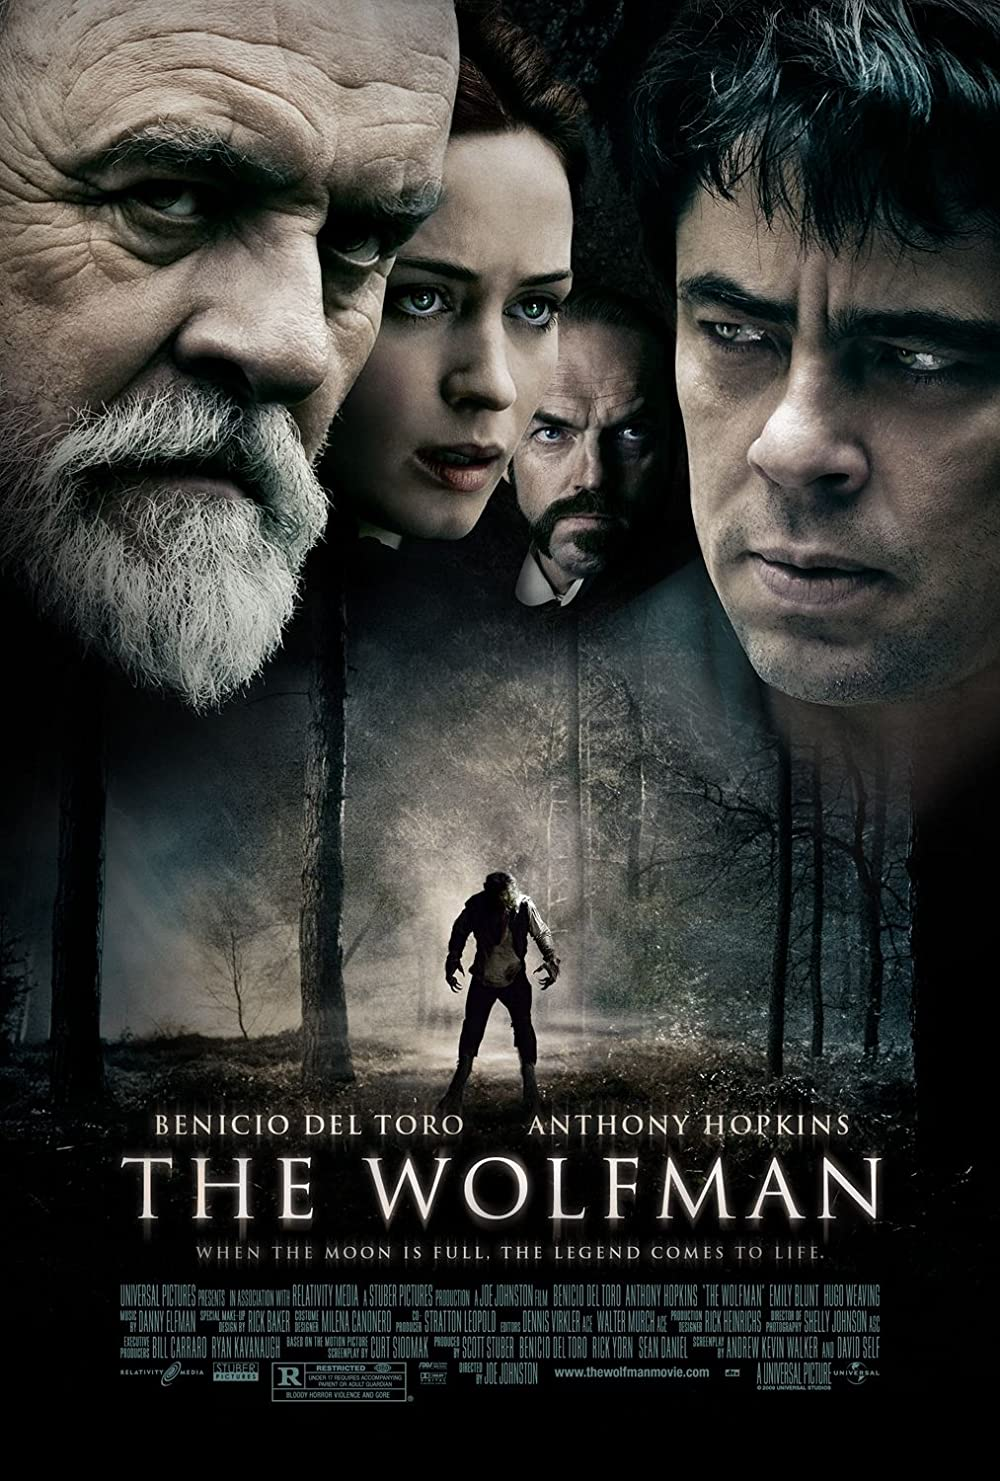 Review: The wolfman (2010)